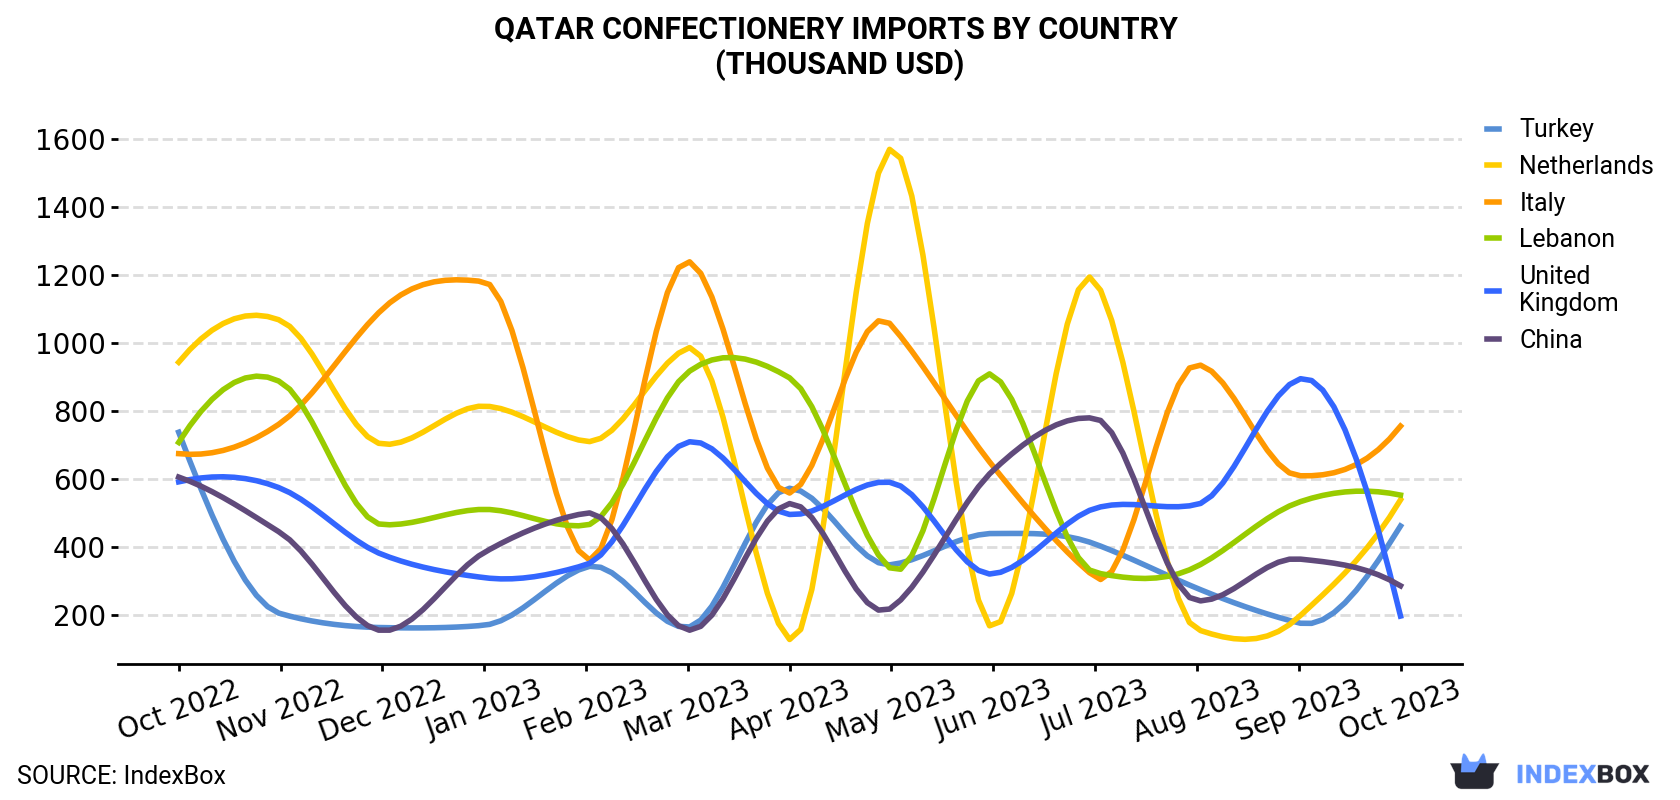 Qatar Confectionery Imports By Country (Thousand USD)